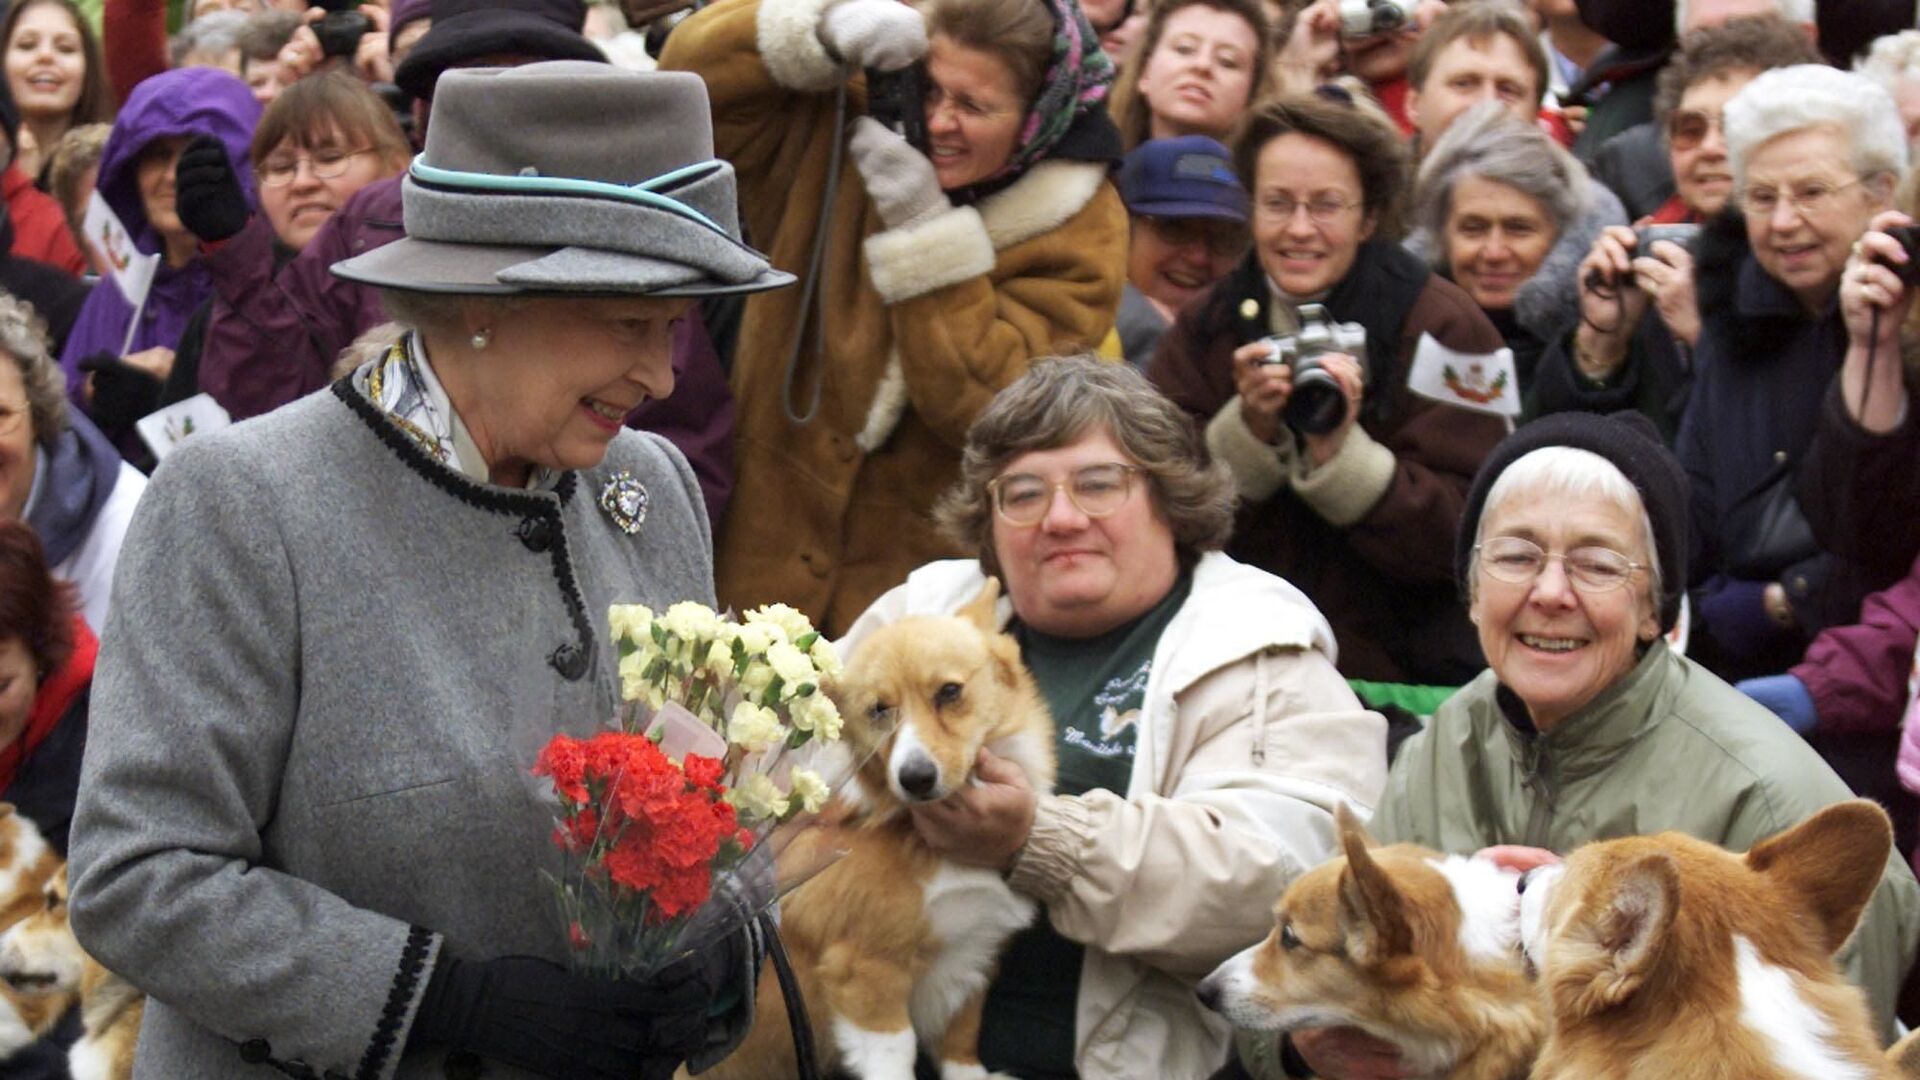 Queen Elizabeth II talks with members of the Manitoba Corgi Association during a visit to Winnipeg 08 October 2002. The queen, making her 20th trip to Canada, is the last stop on the year-long jubilee tour celebrating her 50-year reign.  - Sputnik International, 1920, 05.03.2021